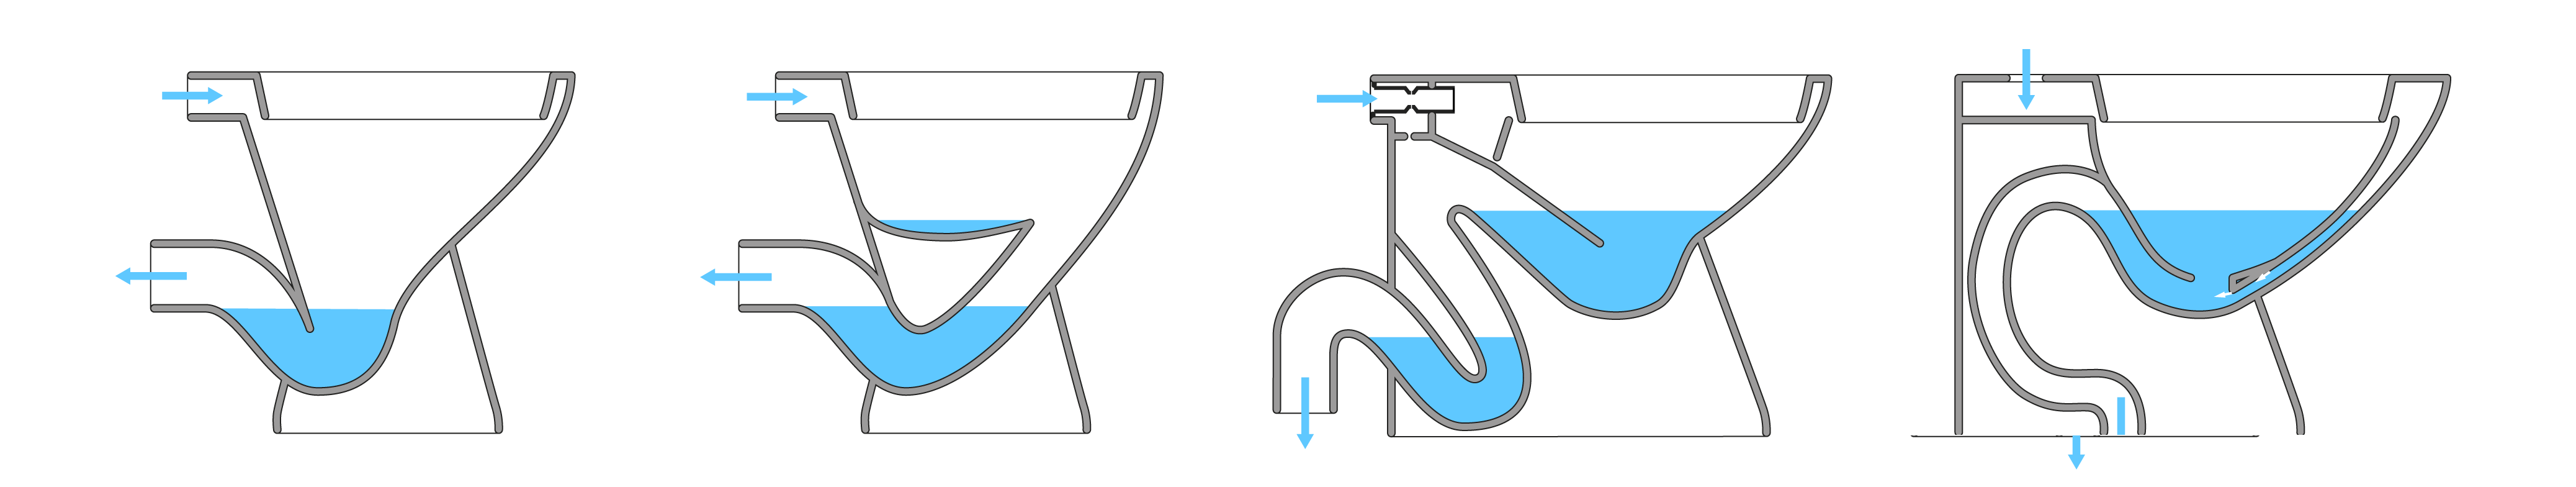 Phases of Flushing The Toilet: What Happens And Where Does My Stuff Go?